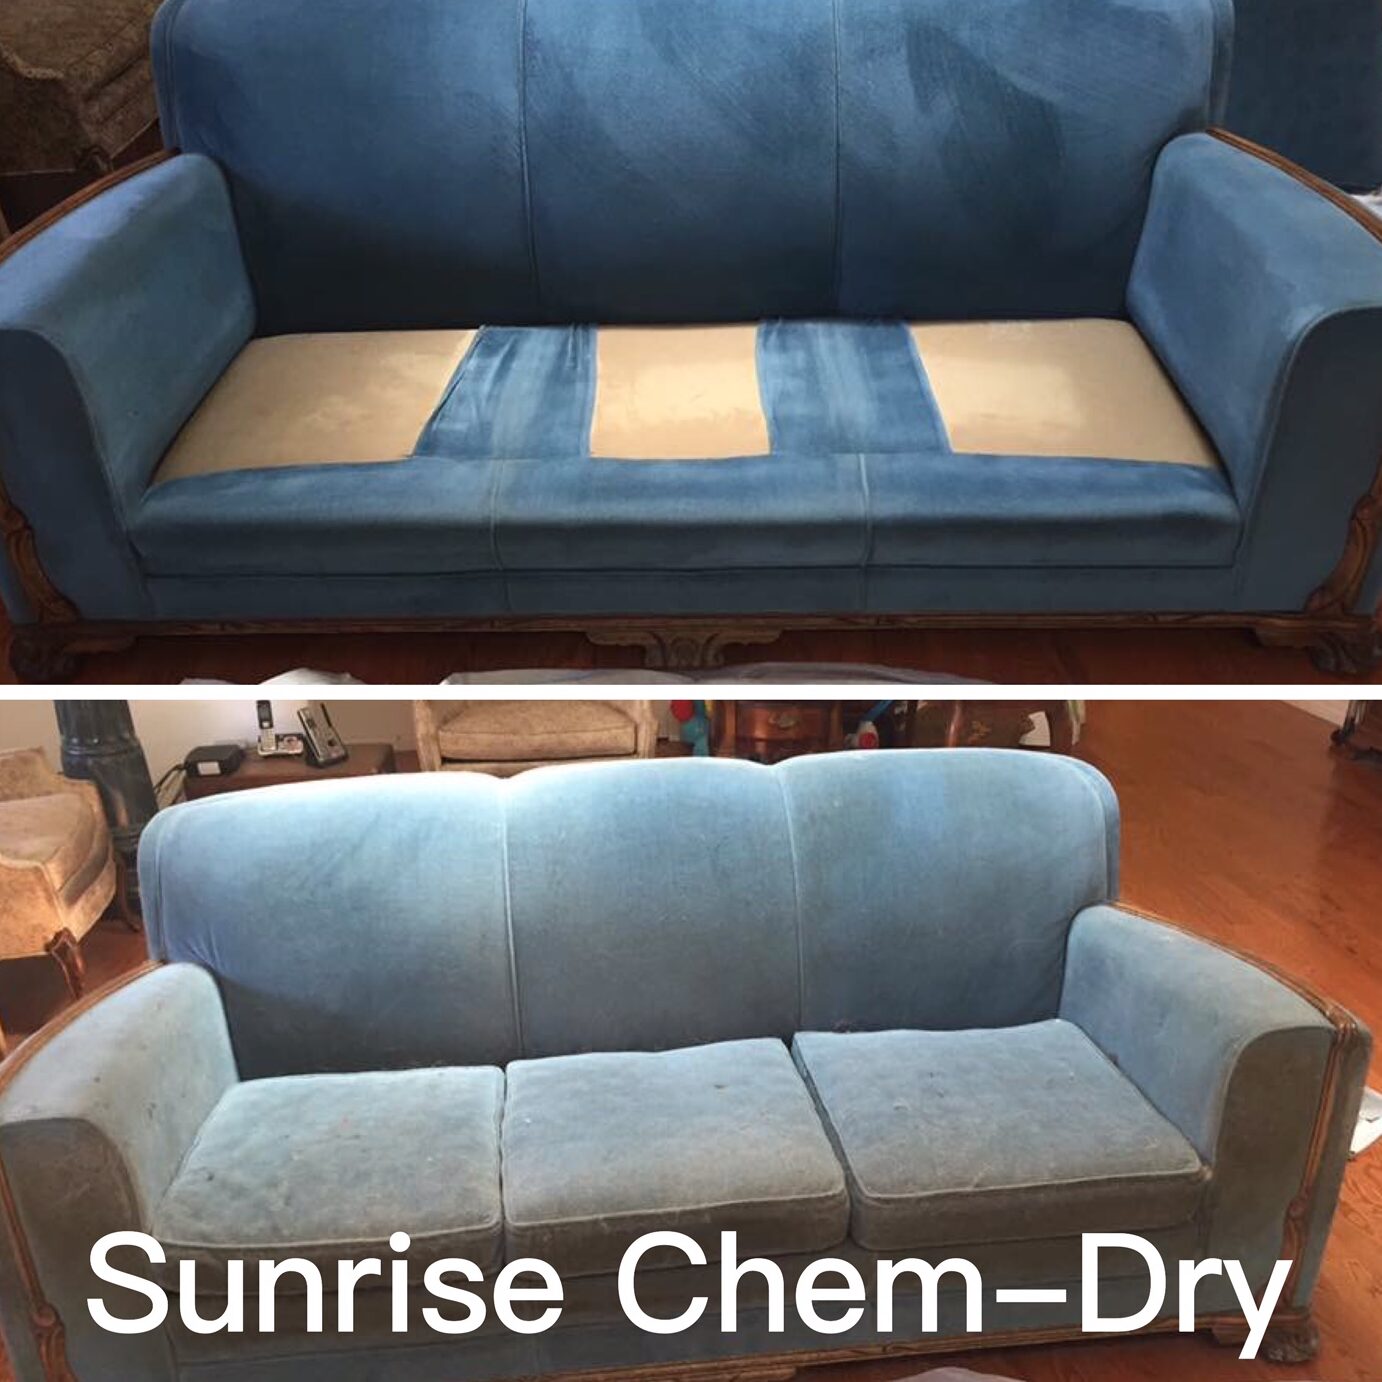 How to Remove Pet Urine from Leather Furniture